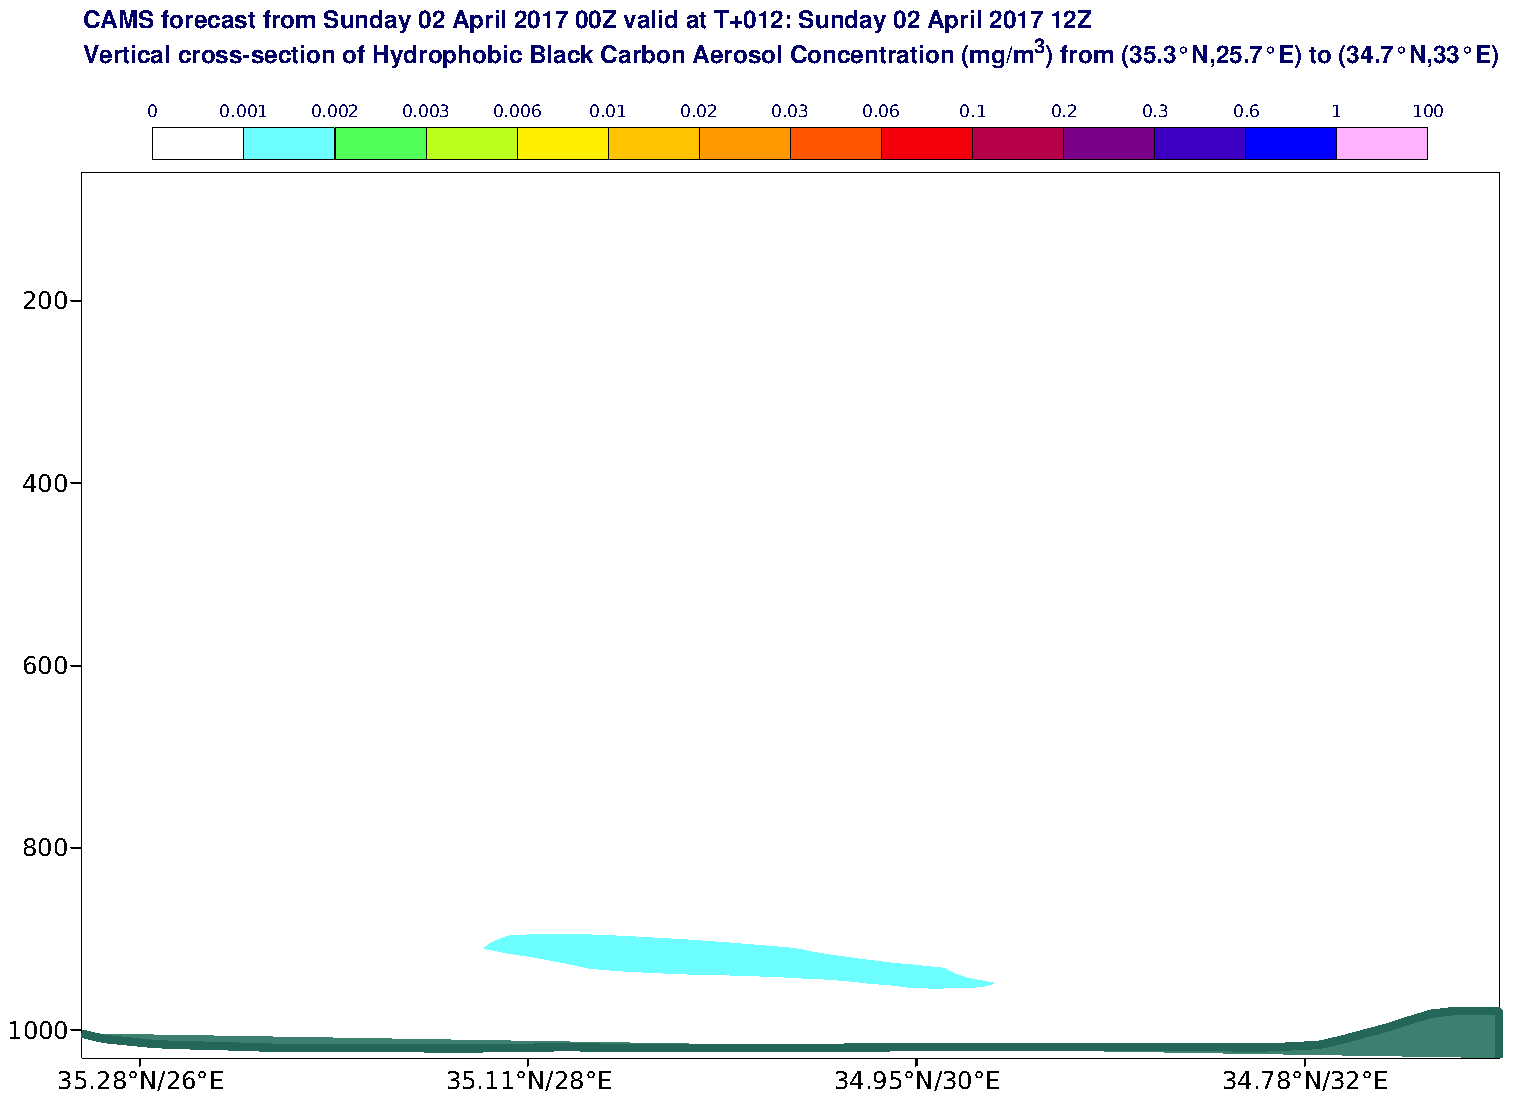 Vertical cross-section of Hydrophobic Black Carbon Aerosol Concentration (mg/m3) valid at T12 - 2017-04-02 12:00